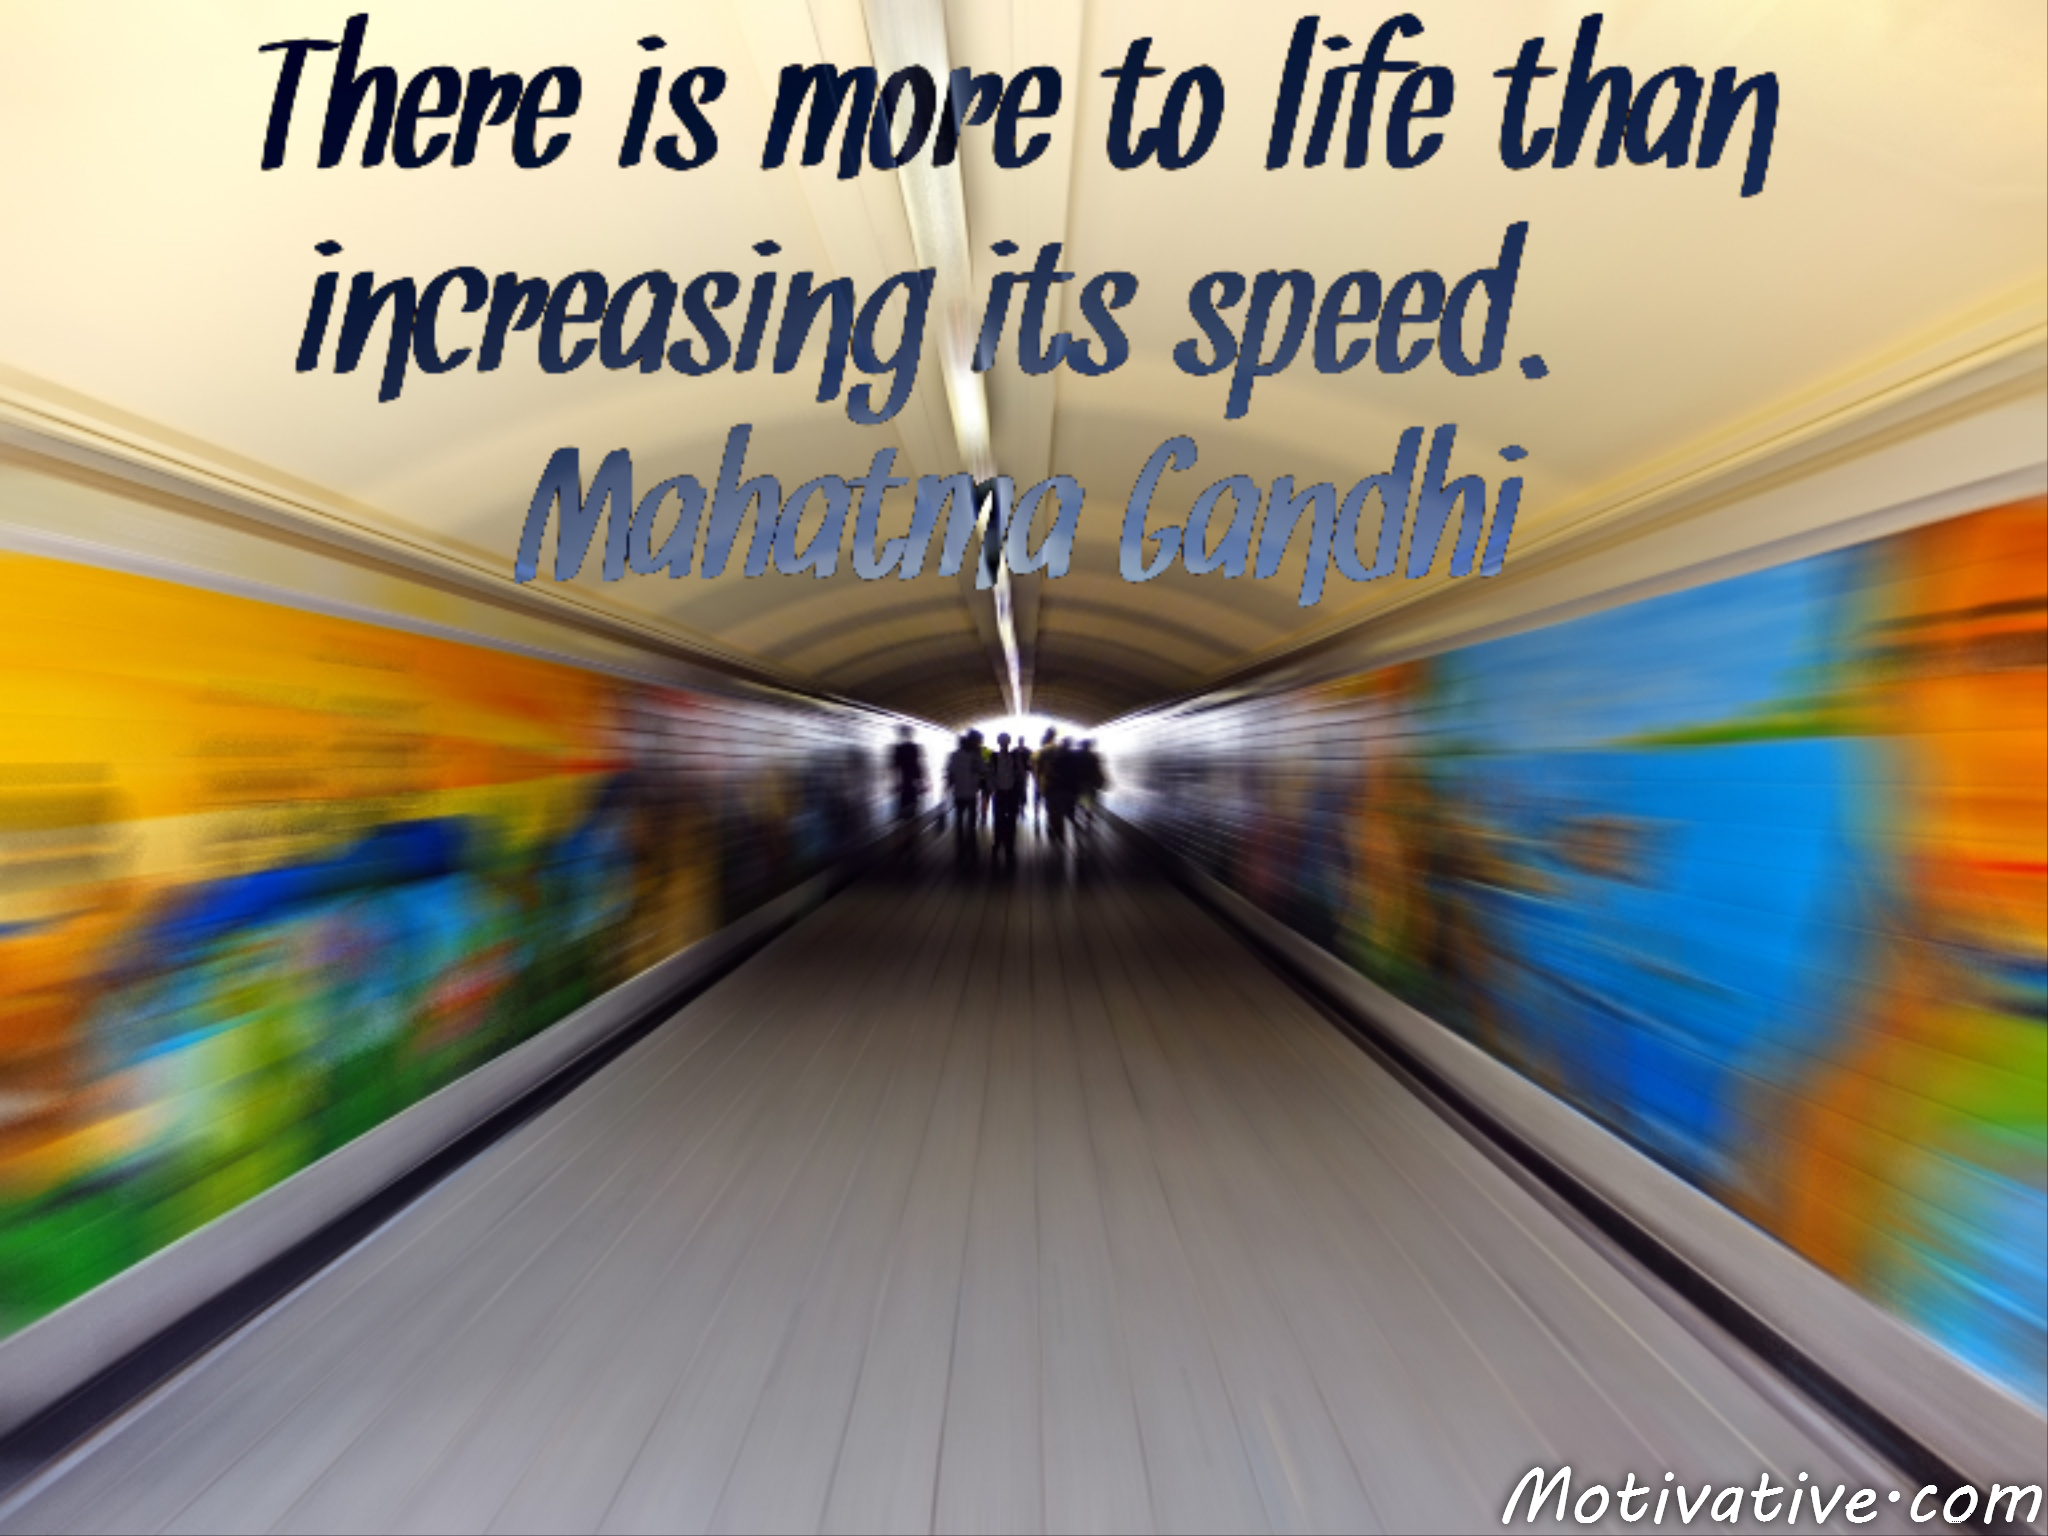 There is more to life than increasing its speed. – Mahatma Gandhi